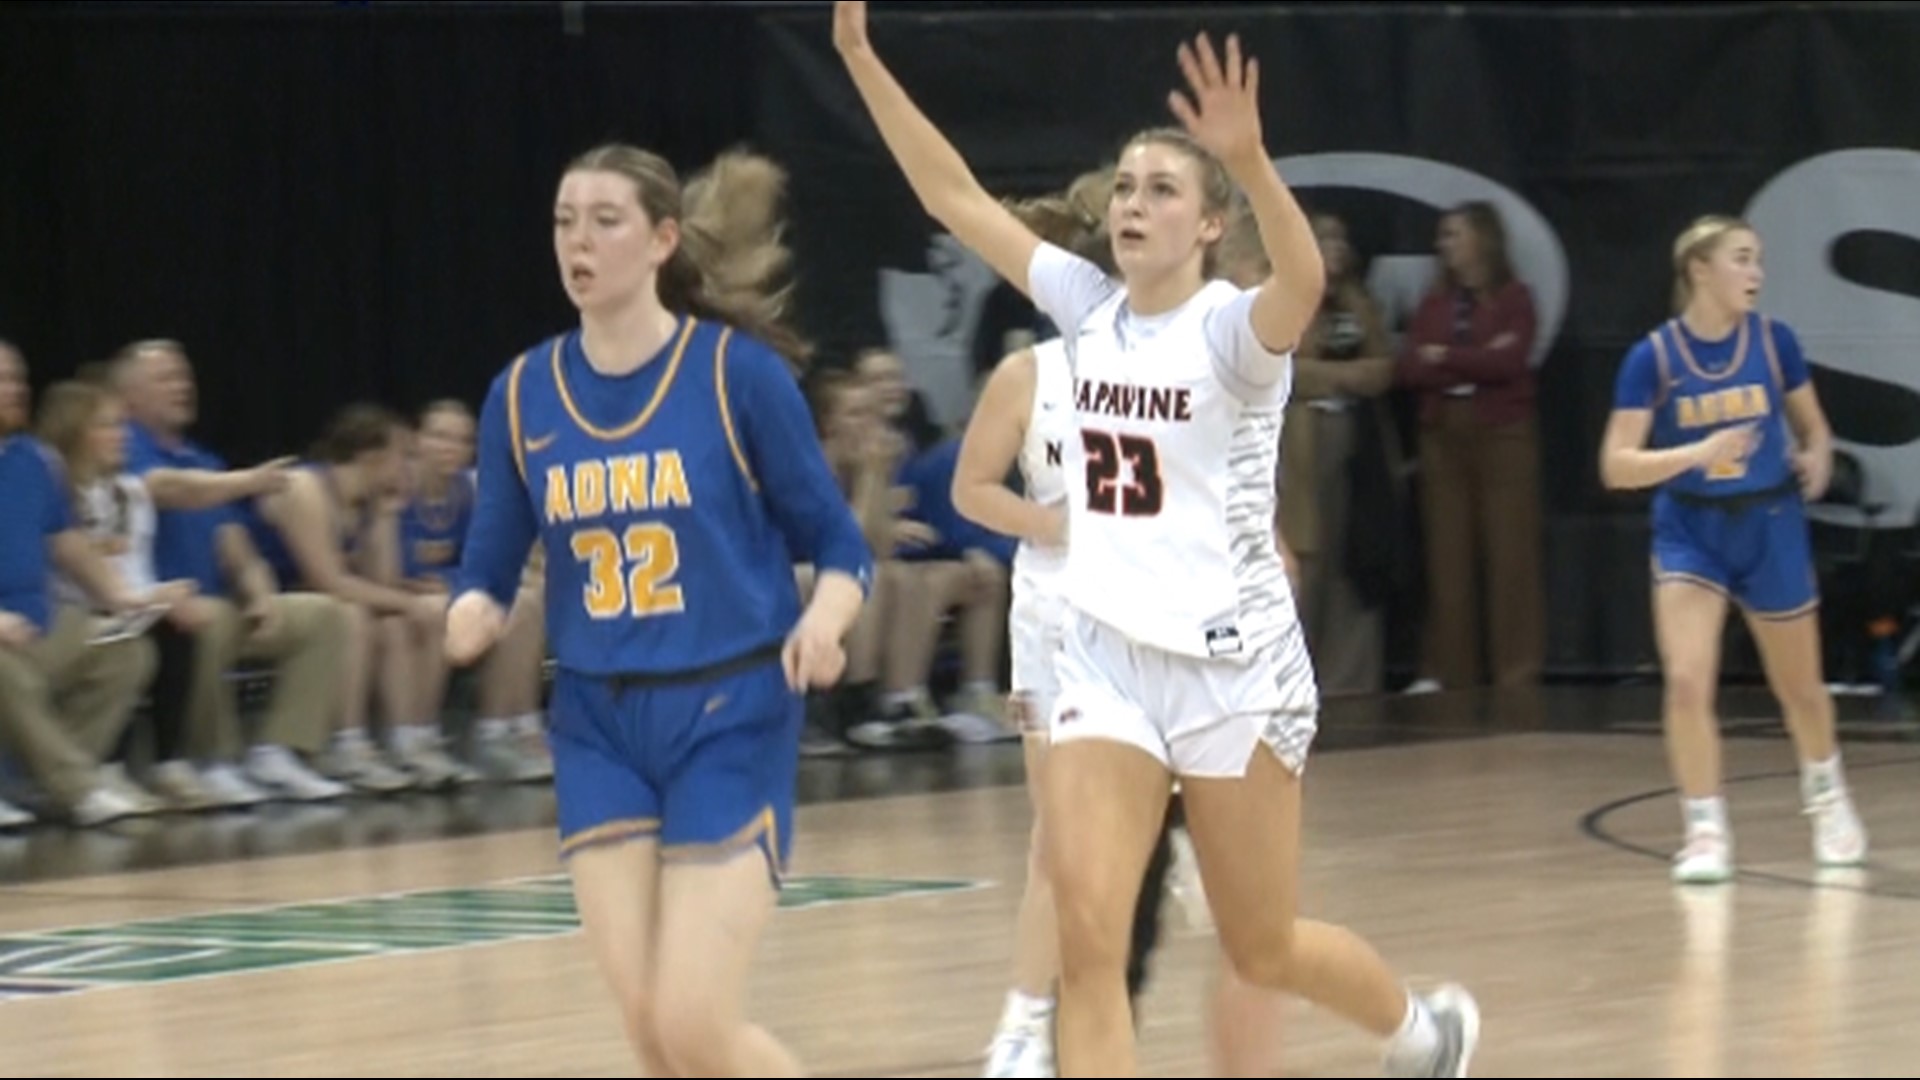 Highlights of the Napavine girls 57-33 win over Adna in the 2B State Semifinals (via KREM)